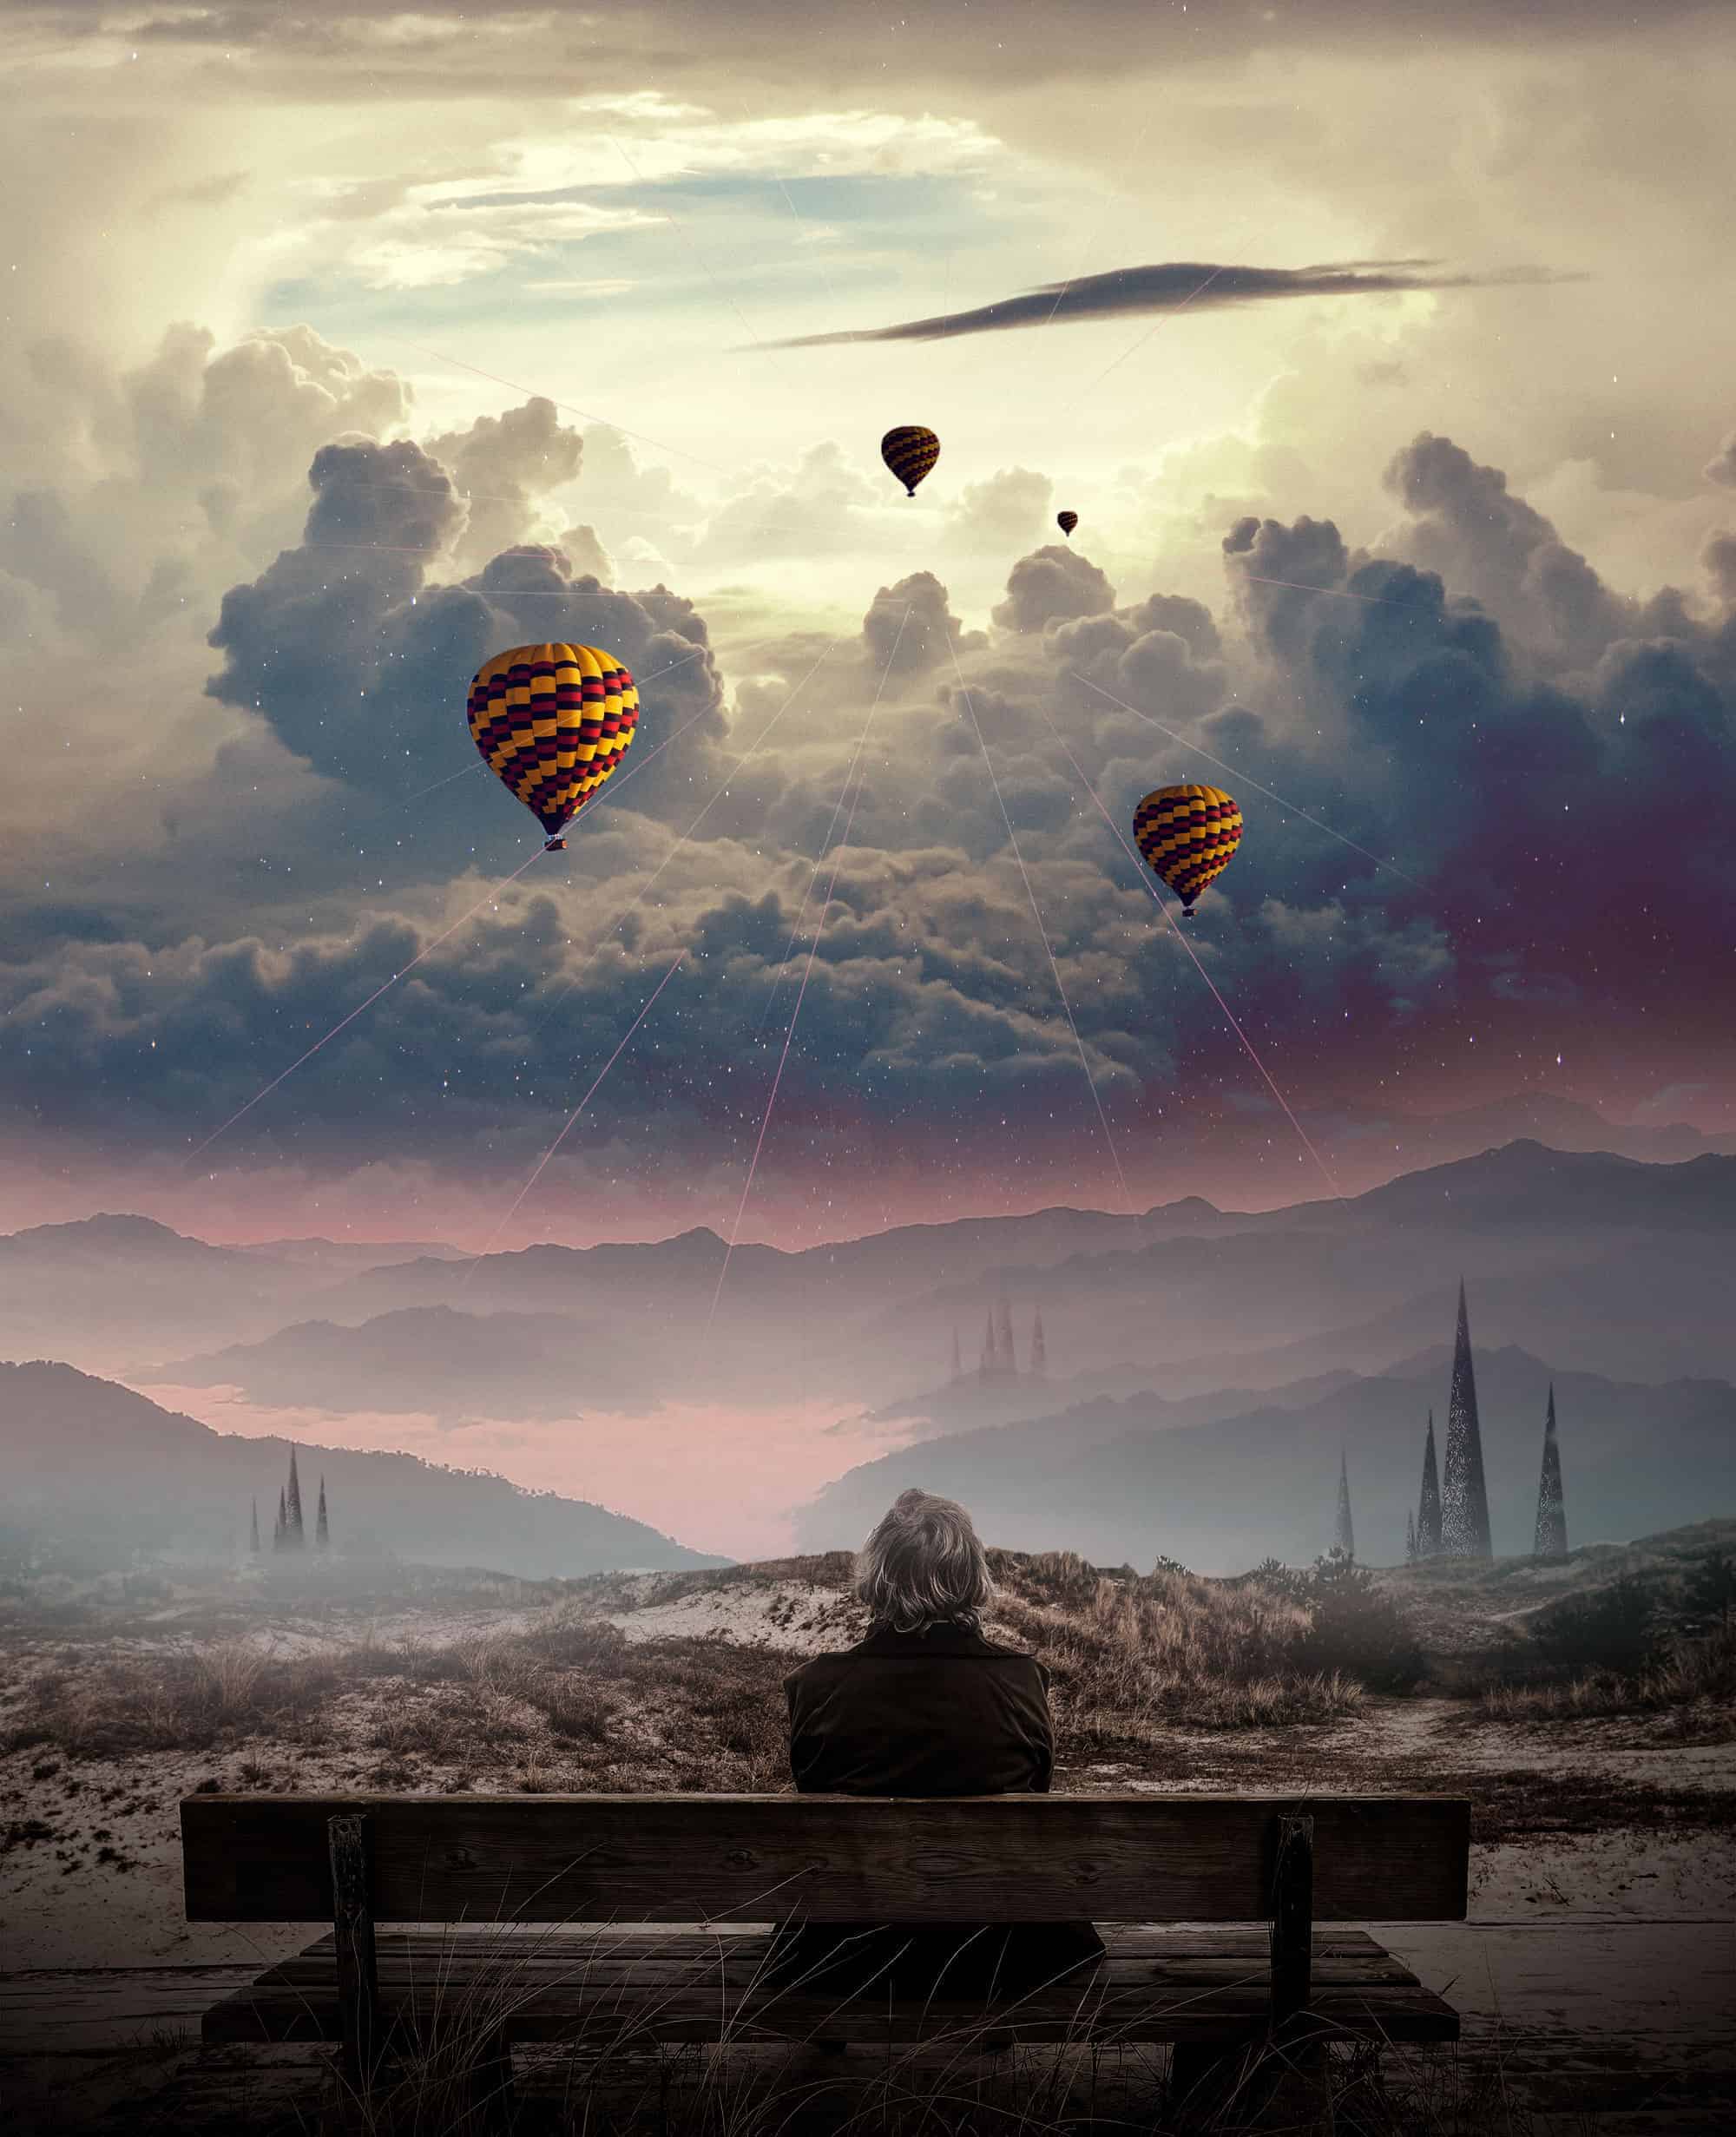 surreal photoshop effects